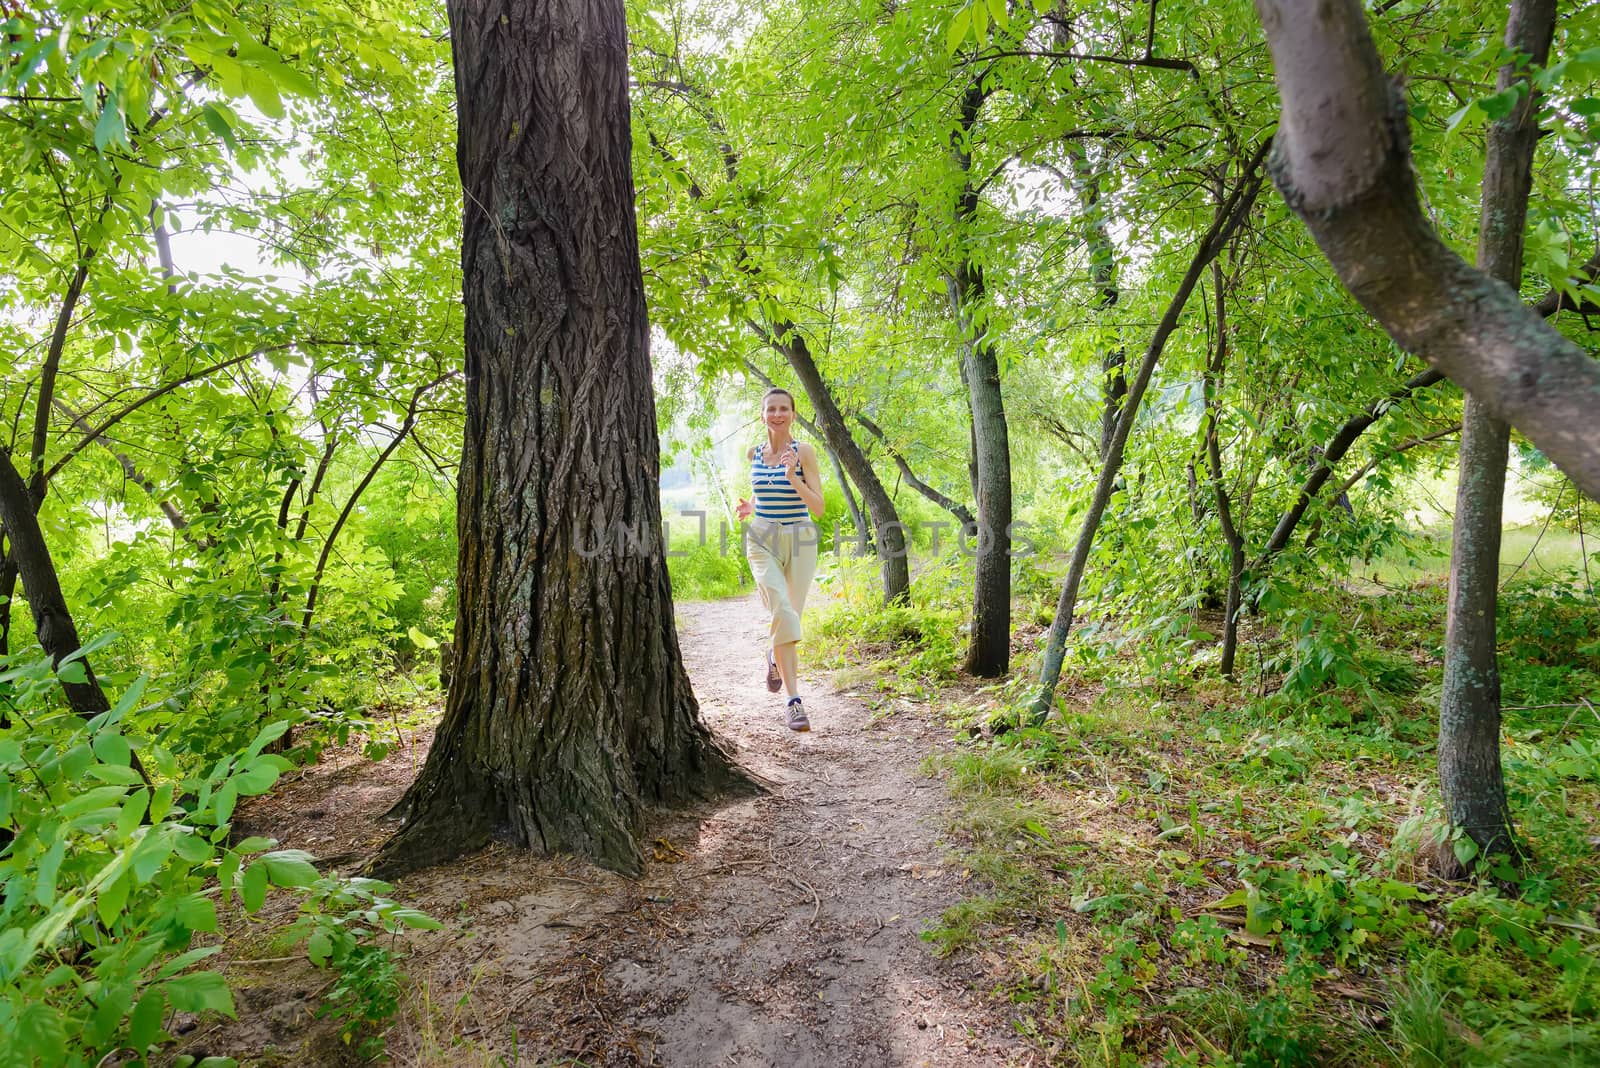 A happy senior woman is running in the forest close to the lake during a warm summer day